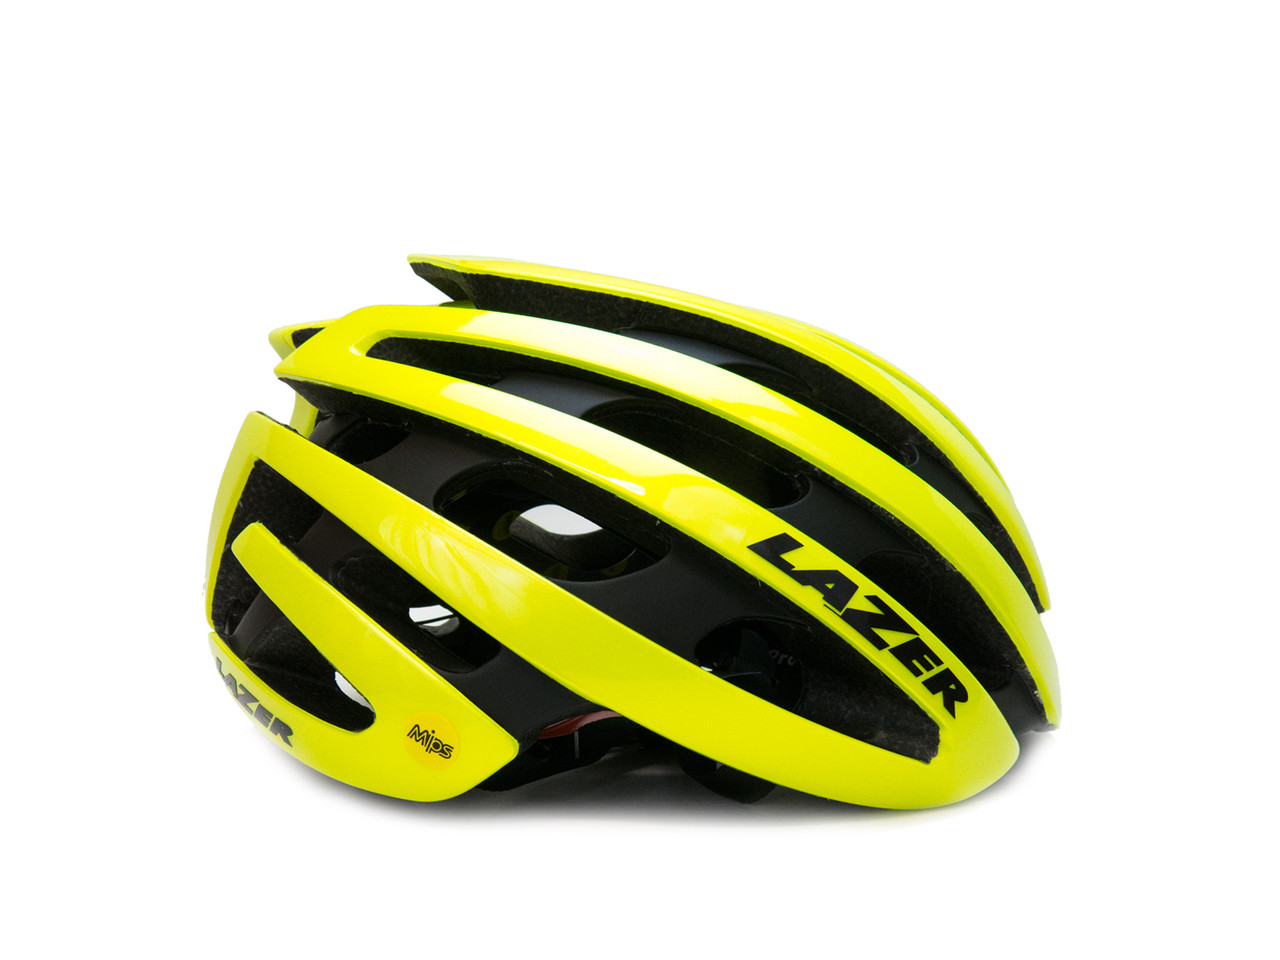 Lazer Z1 Mips Helmet Bikeshoes Com Free 3 Day Shipping On Orders Over 50